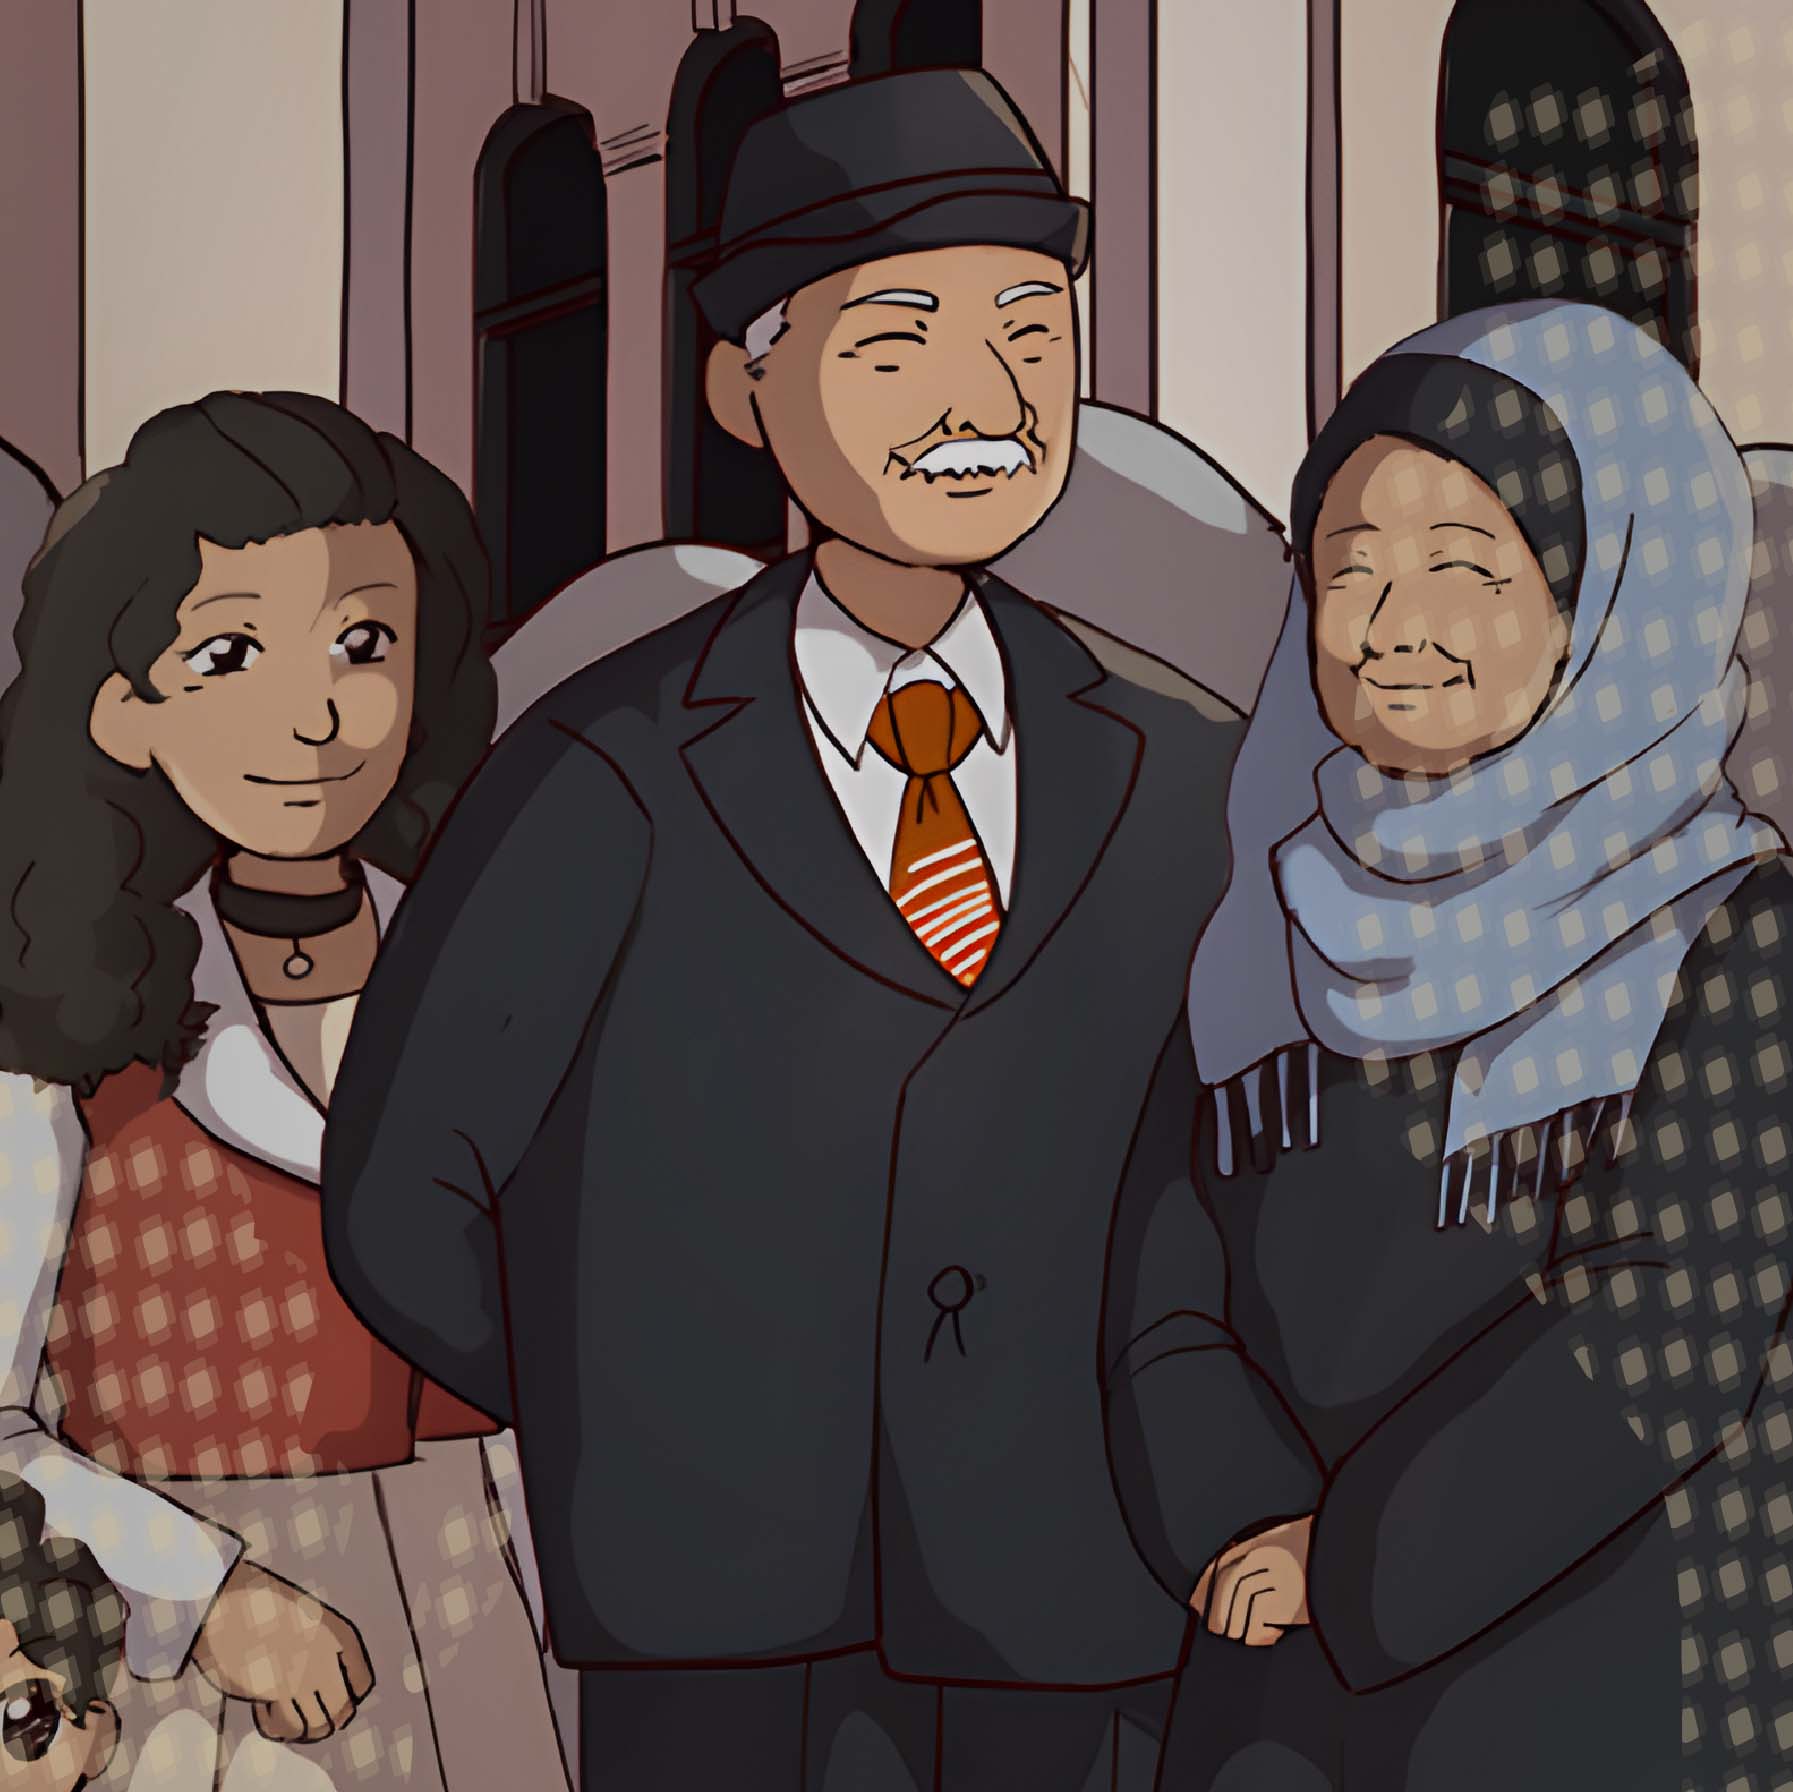 Illustration of a smiling elderly man in a suit and hat, with a young girl to his left and an elderly woman wearing a headscarf to his right.